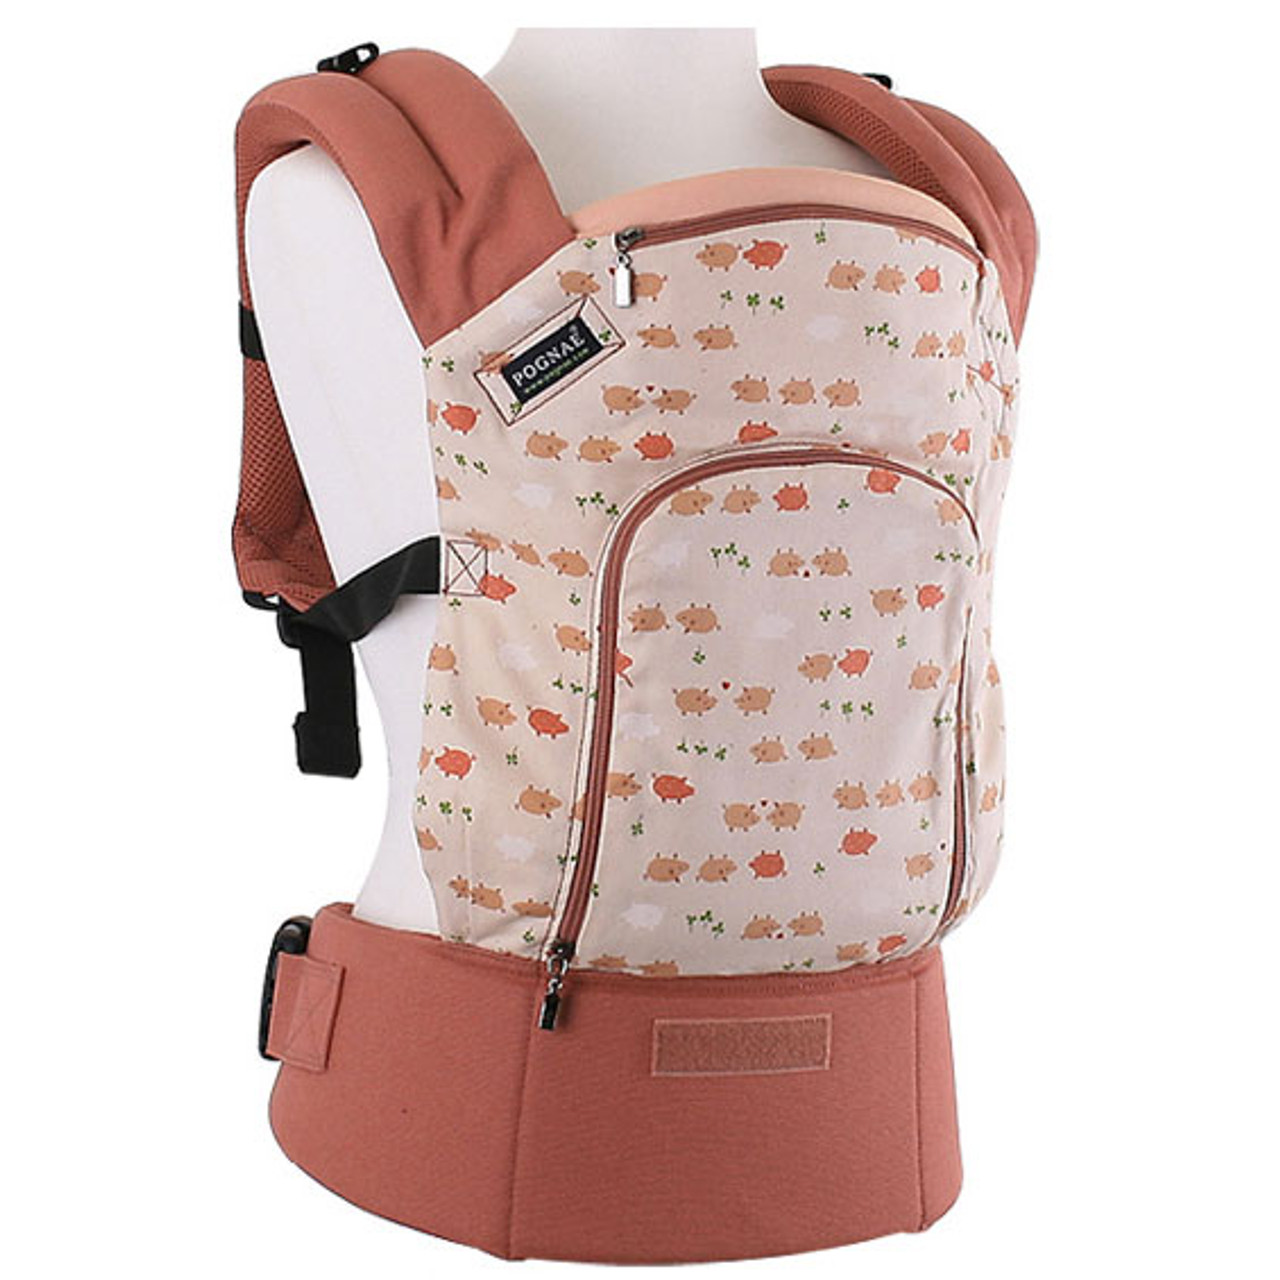 pognae baby carrier